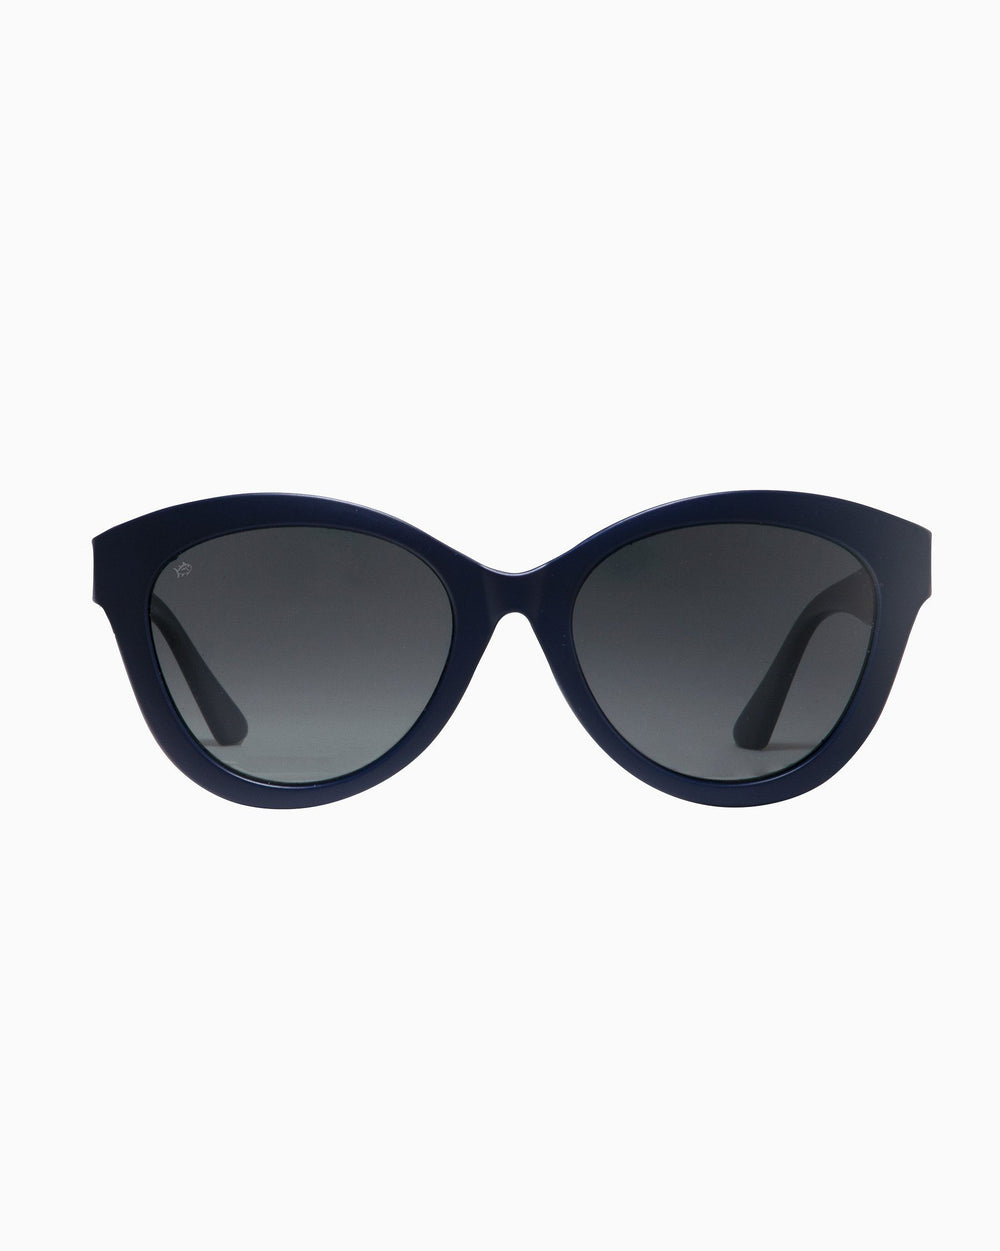 The front of the Women's Rheos Faris Sunglasses by Southern Tide - Boat Blue Gunmetal